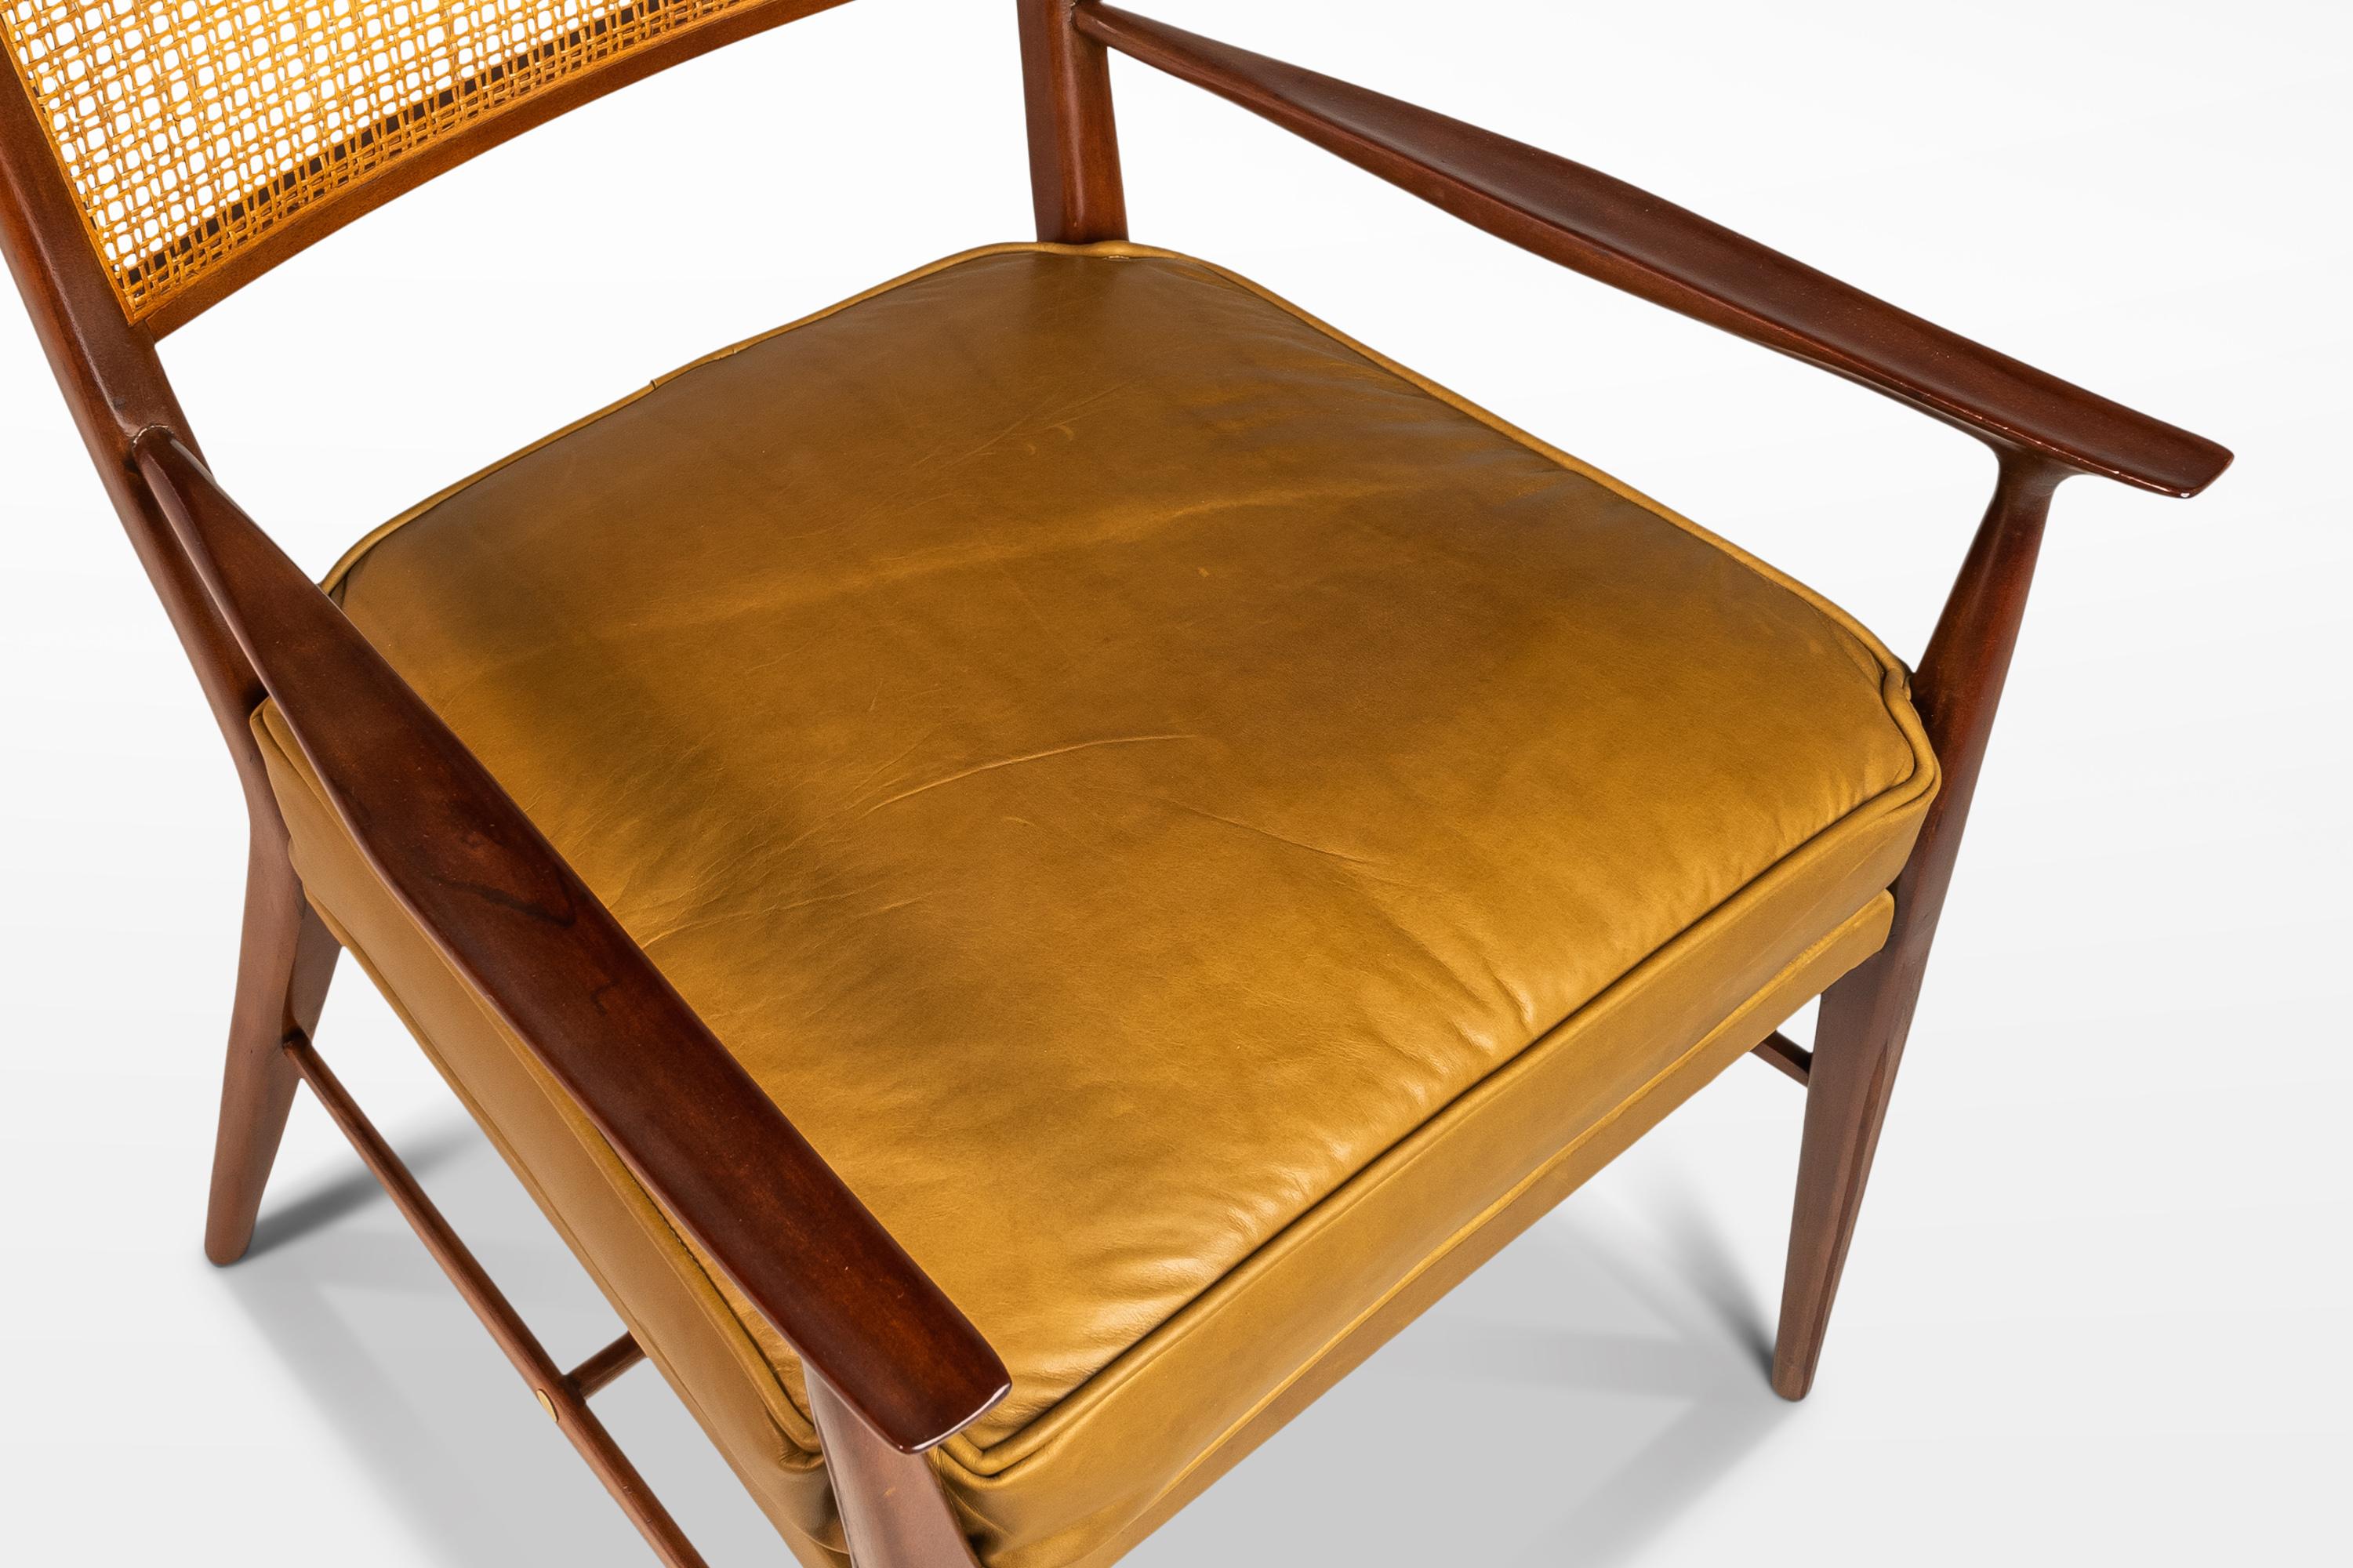 MCM Model 7001 Chair in Walnut by Paul McCobb for Directional, USA, c. 1950s For Sale 13